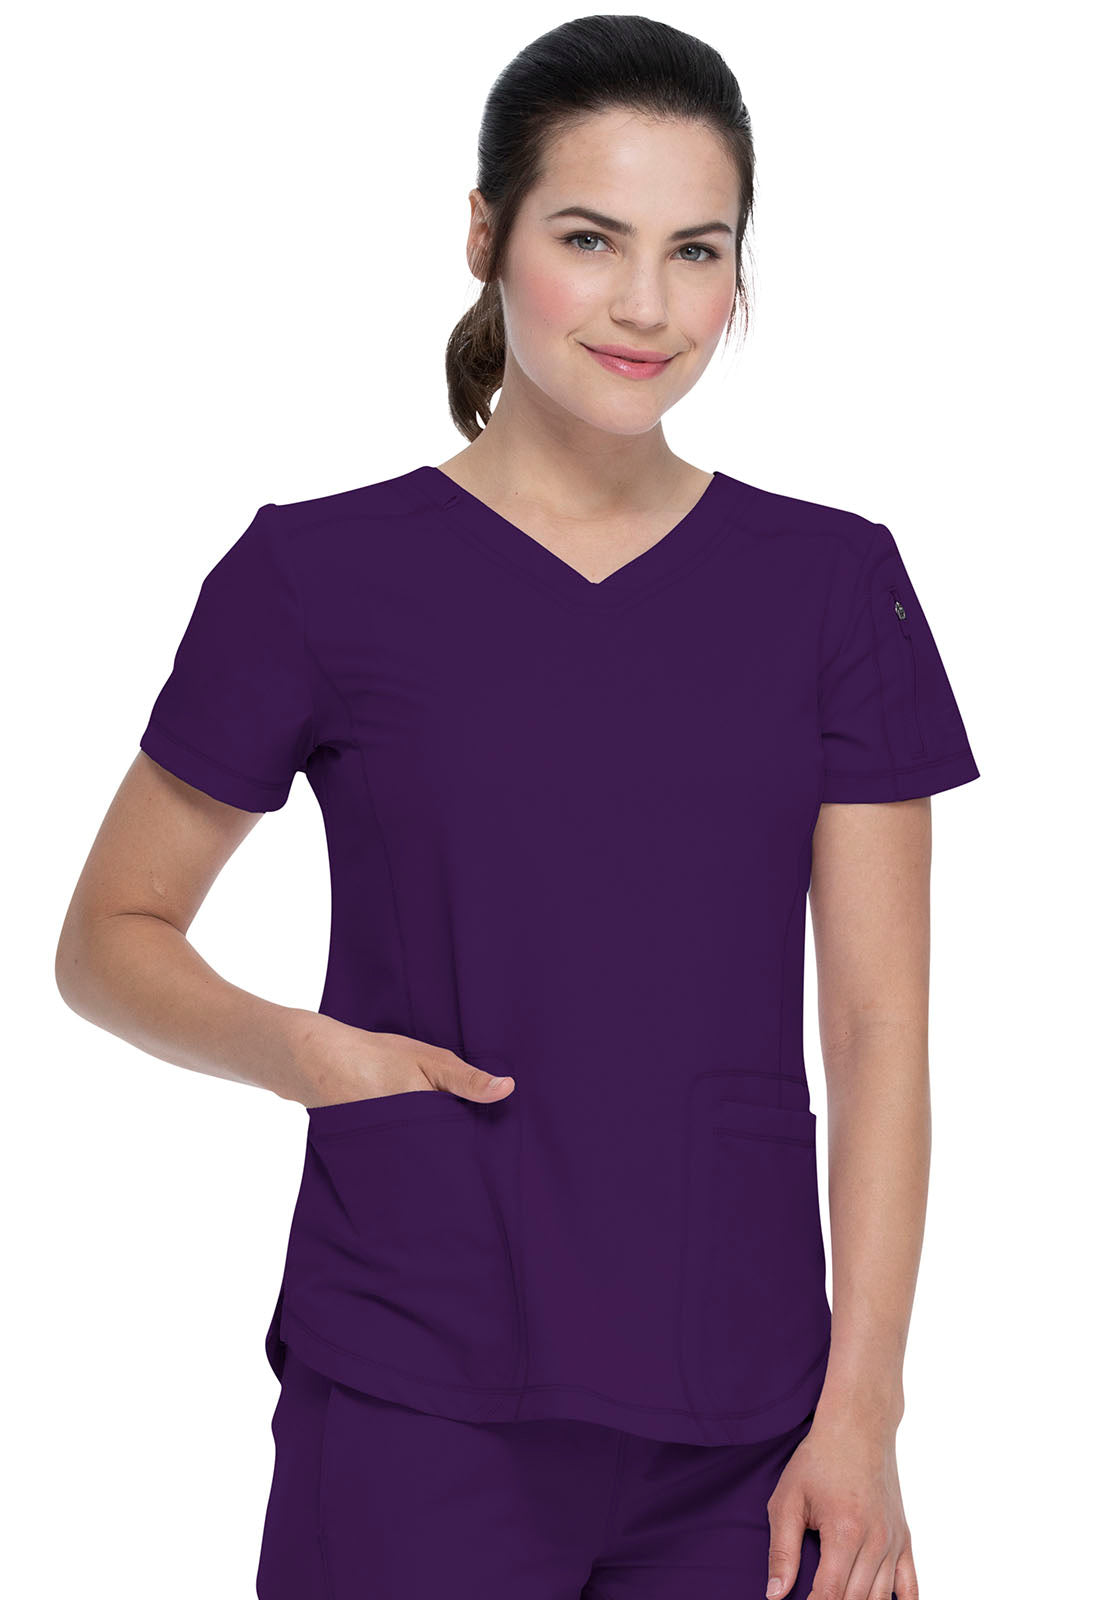 Dickies Dynamix Nurse Scrub Top is made from a high tech poly-spandex fabric blend contructed in a lightweight dobby fabric.  It has lots of pockets to fit all those nursing tools and tech. It is designed to be form flattering, comfort and maximum and durability.